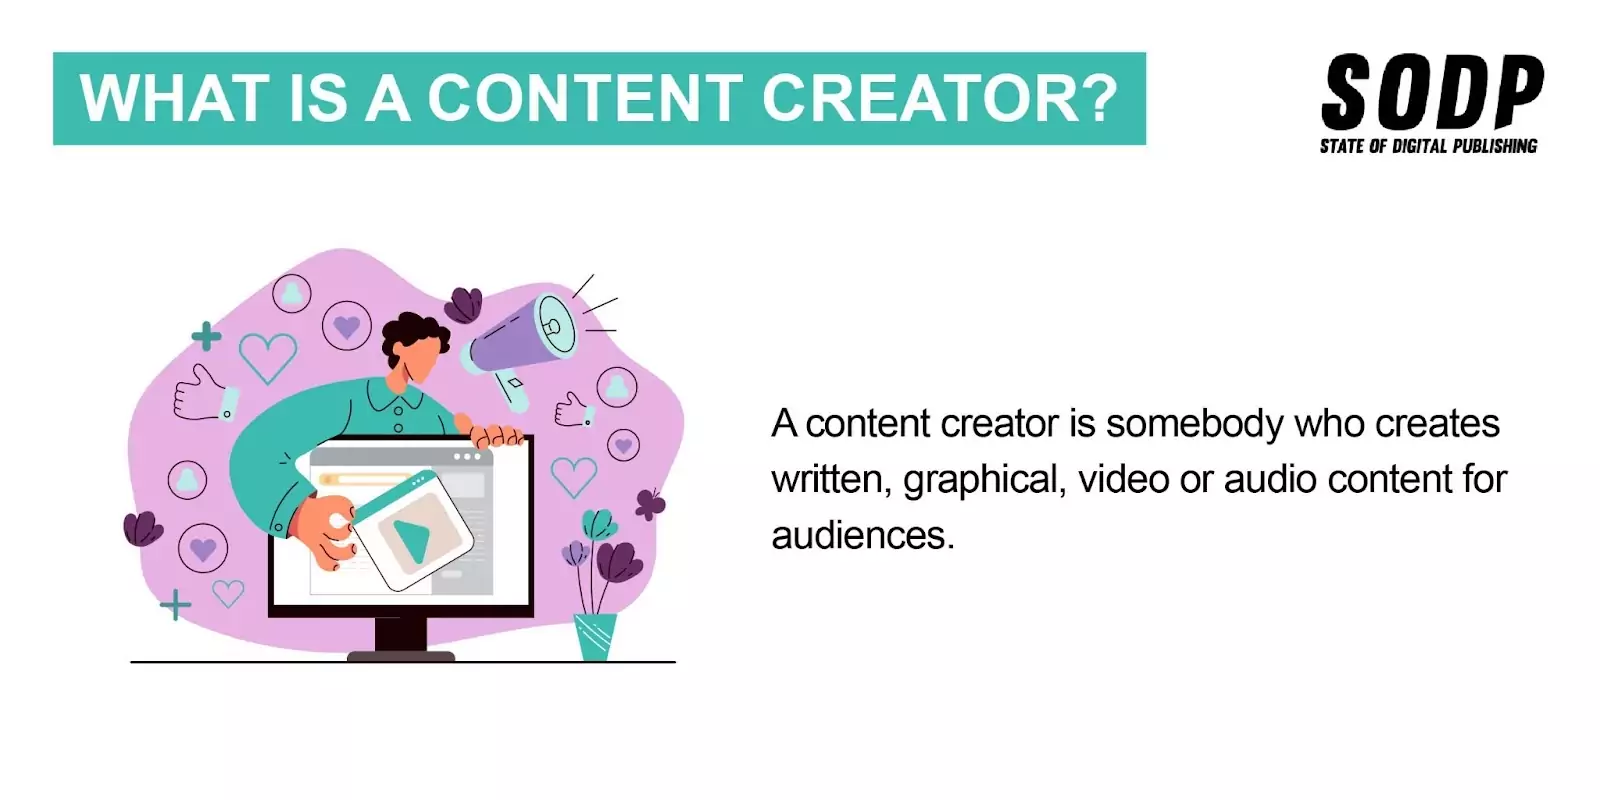 What Is a Content Creator